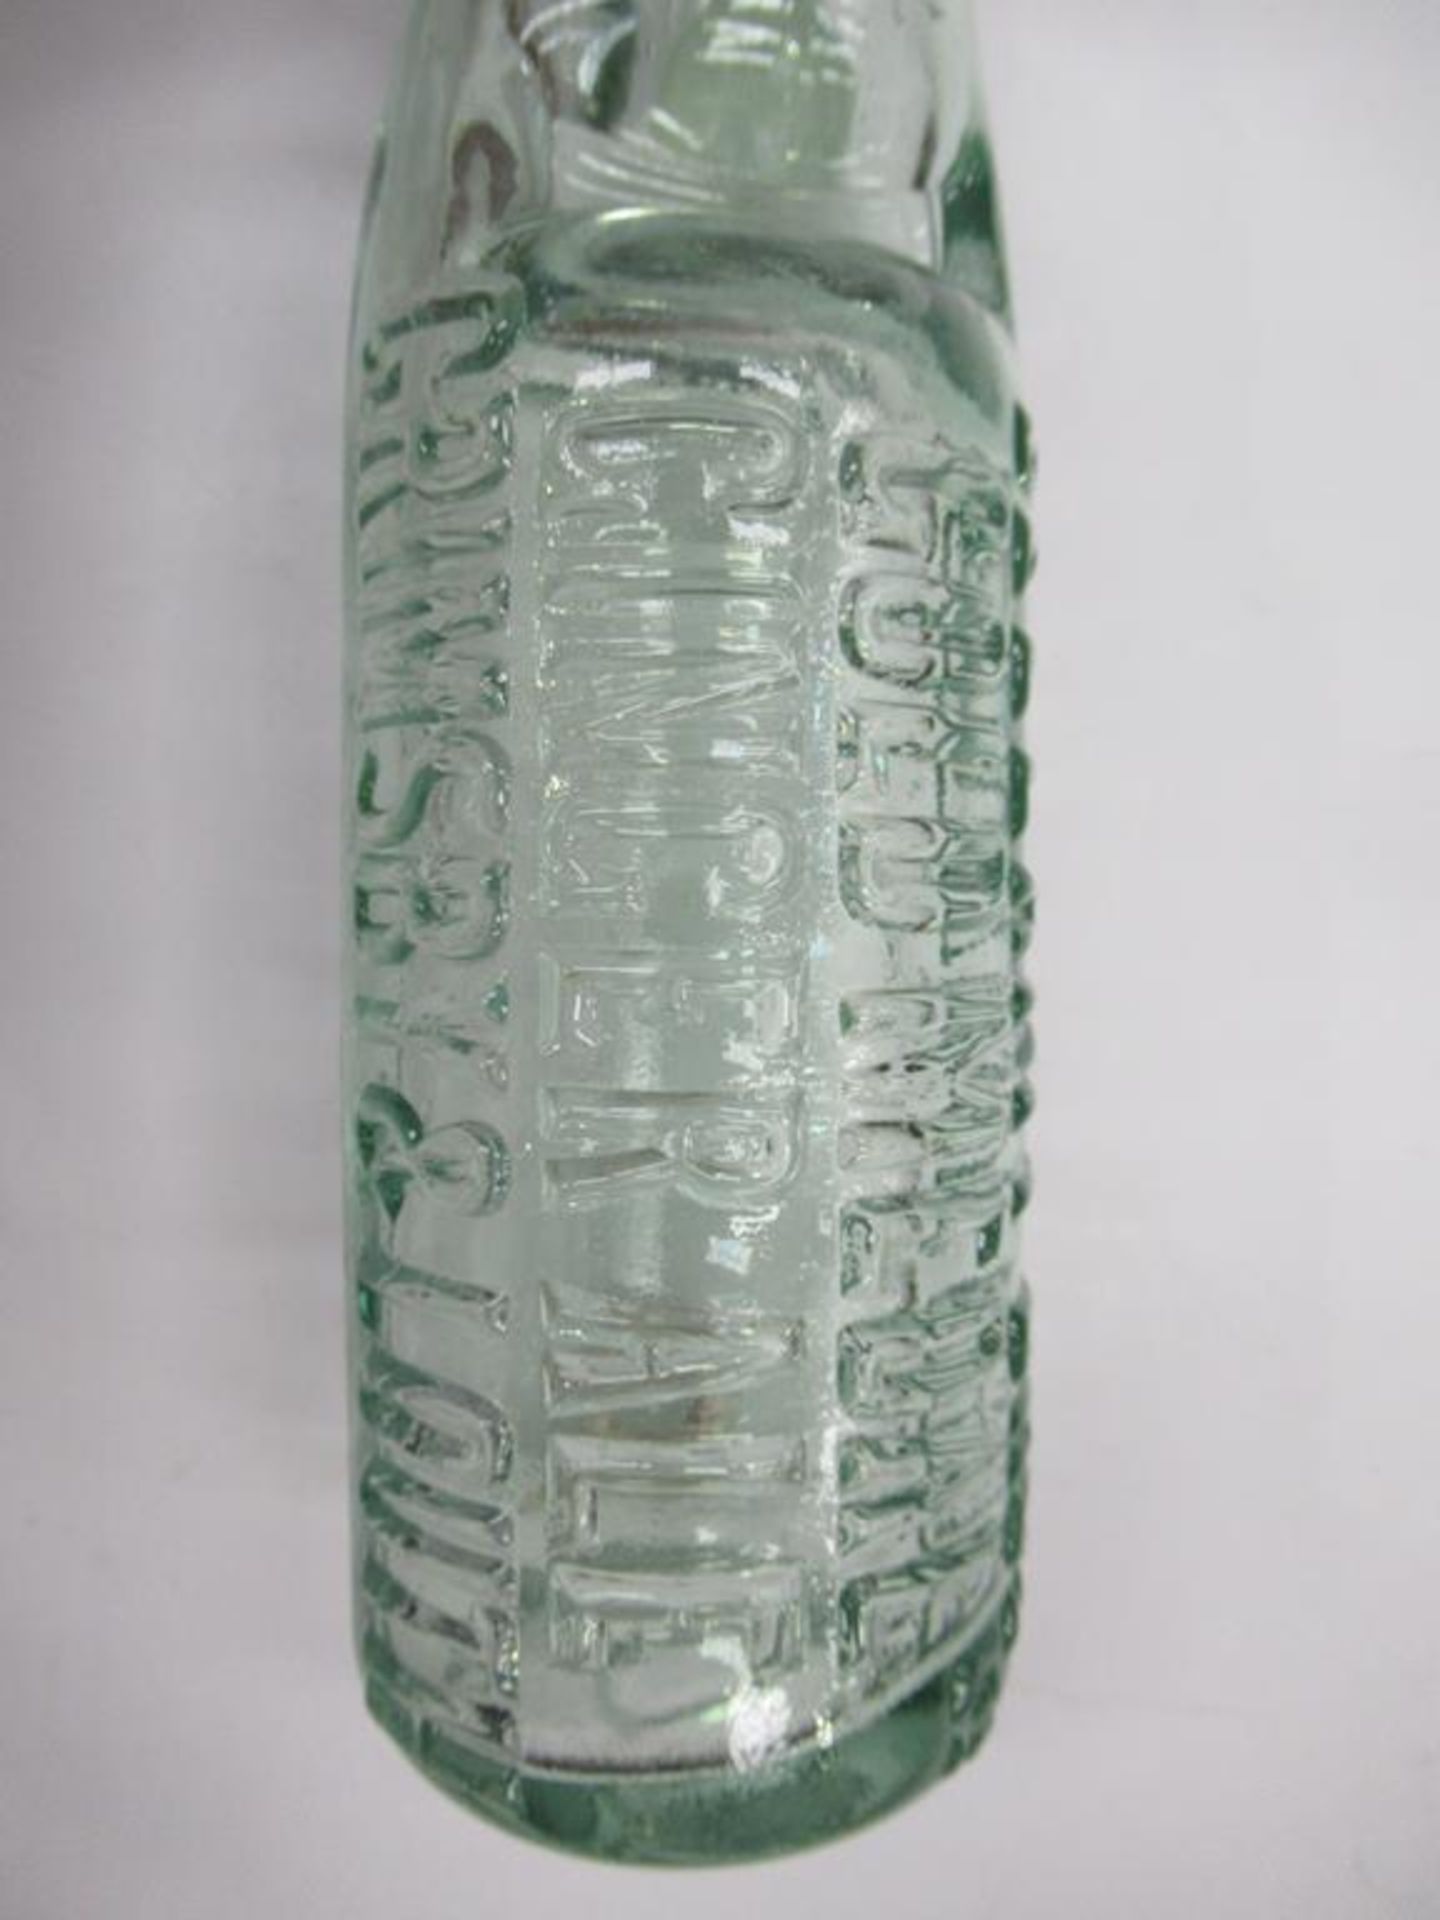 7x Grimsby (3x Grimsby & Louth) Bellamy Bro's Codd bottles - Image 19 of 23